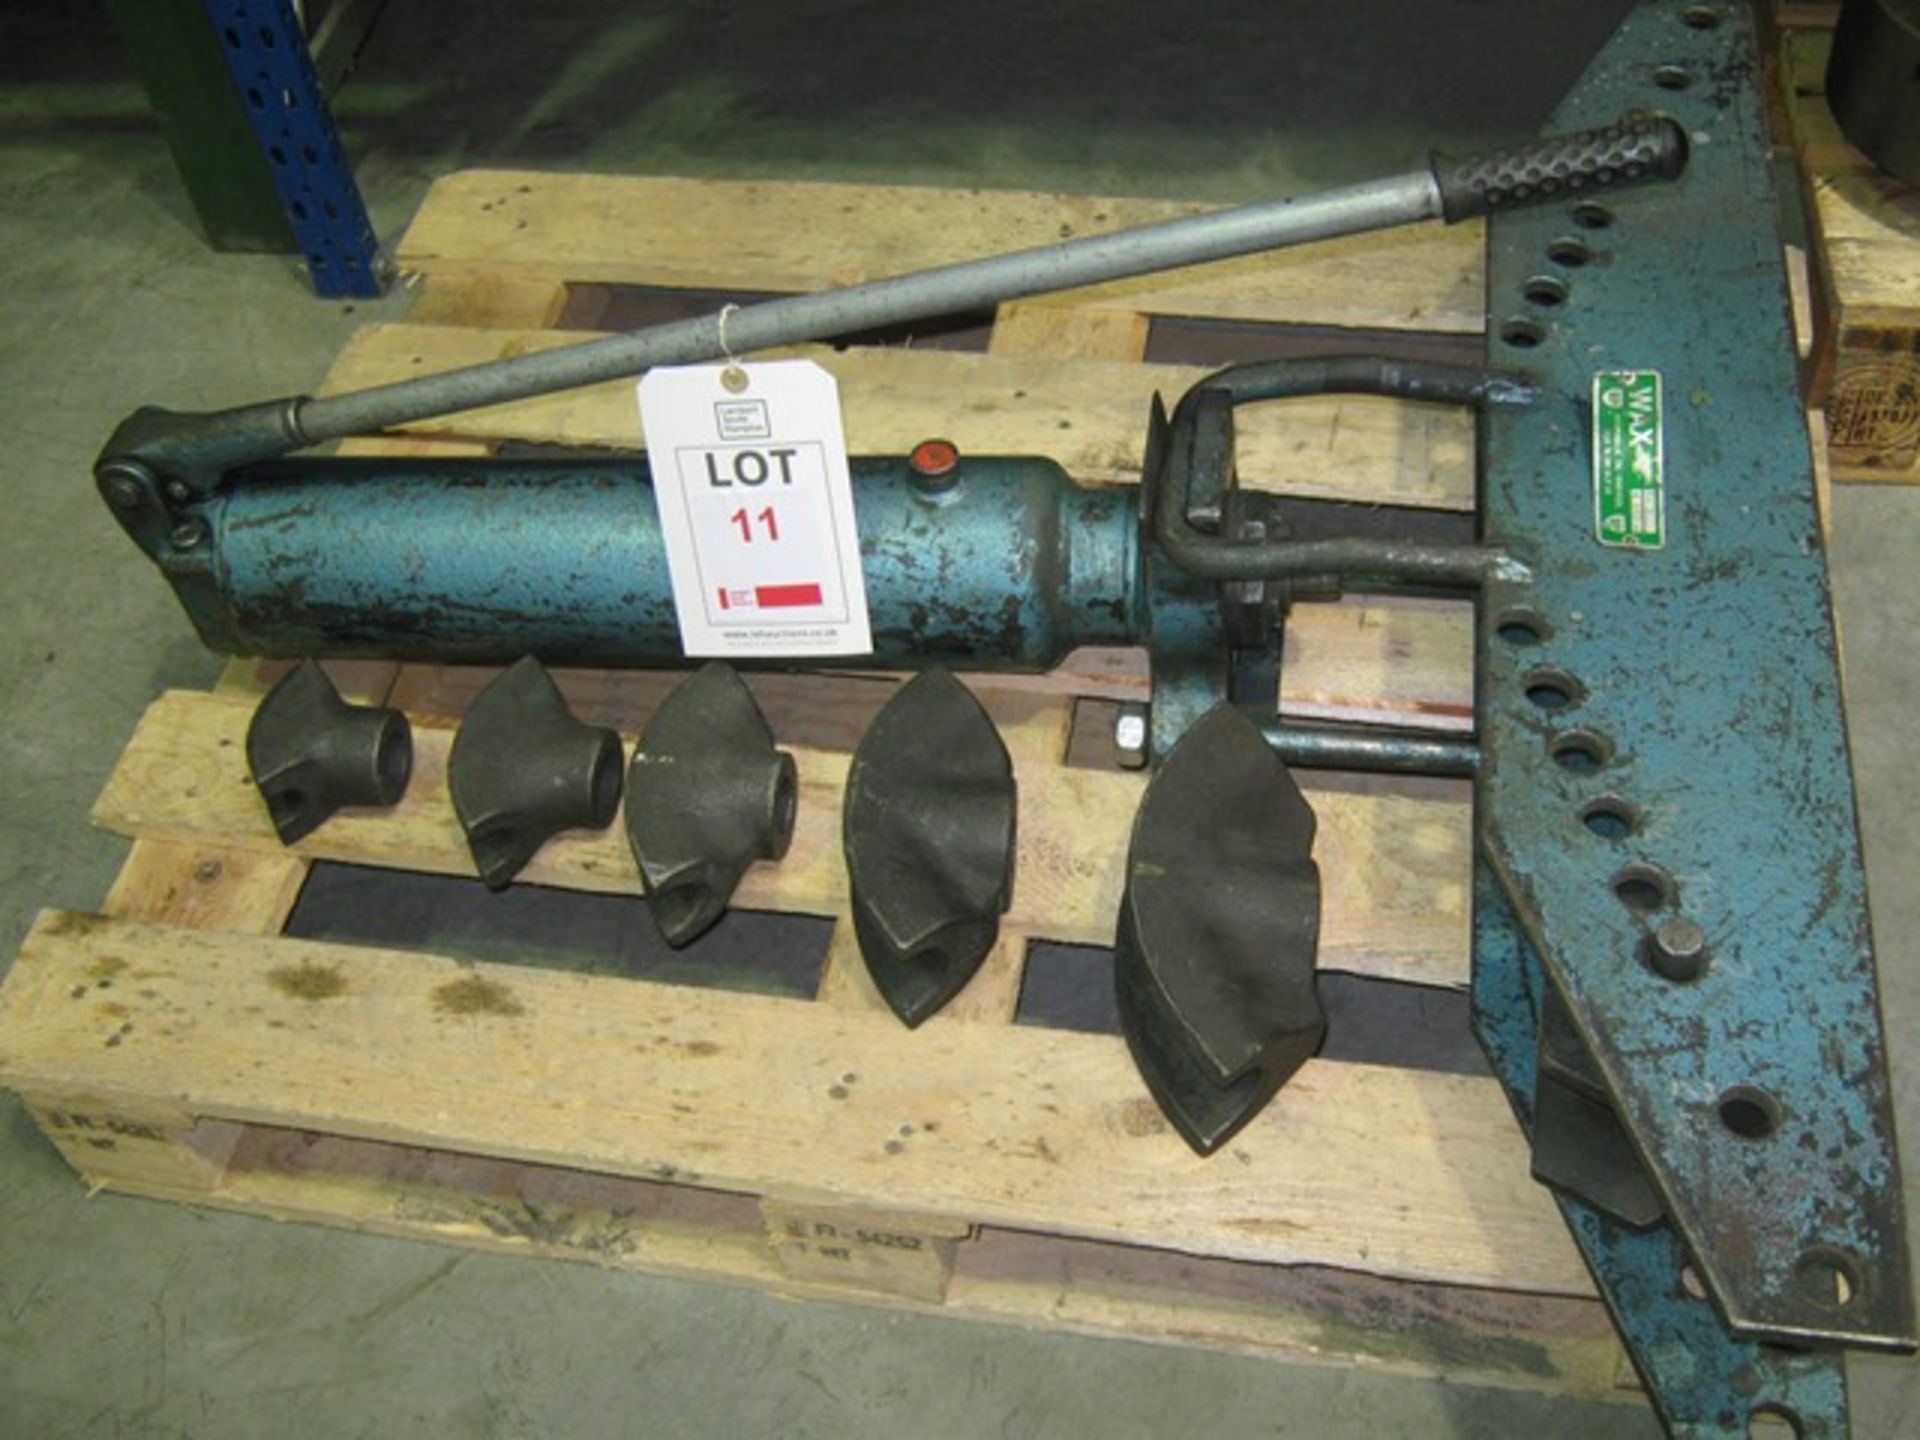 Hydraulic pipe bender, 2" pipe max